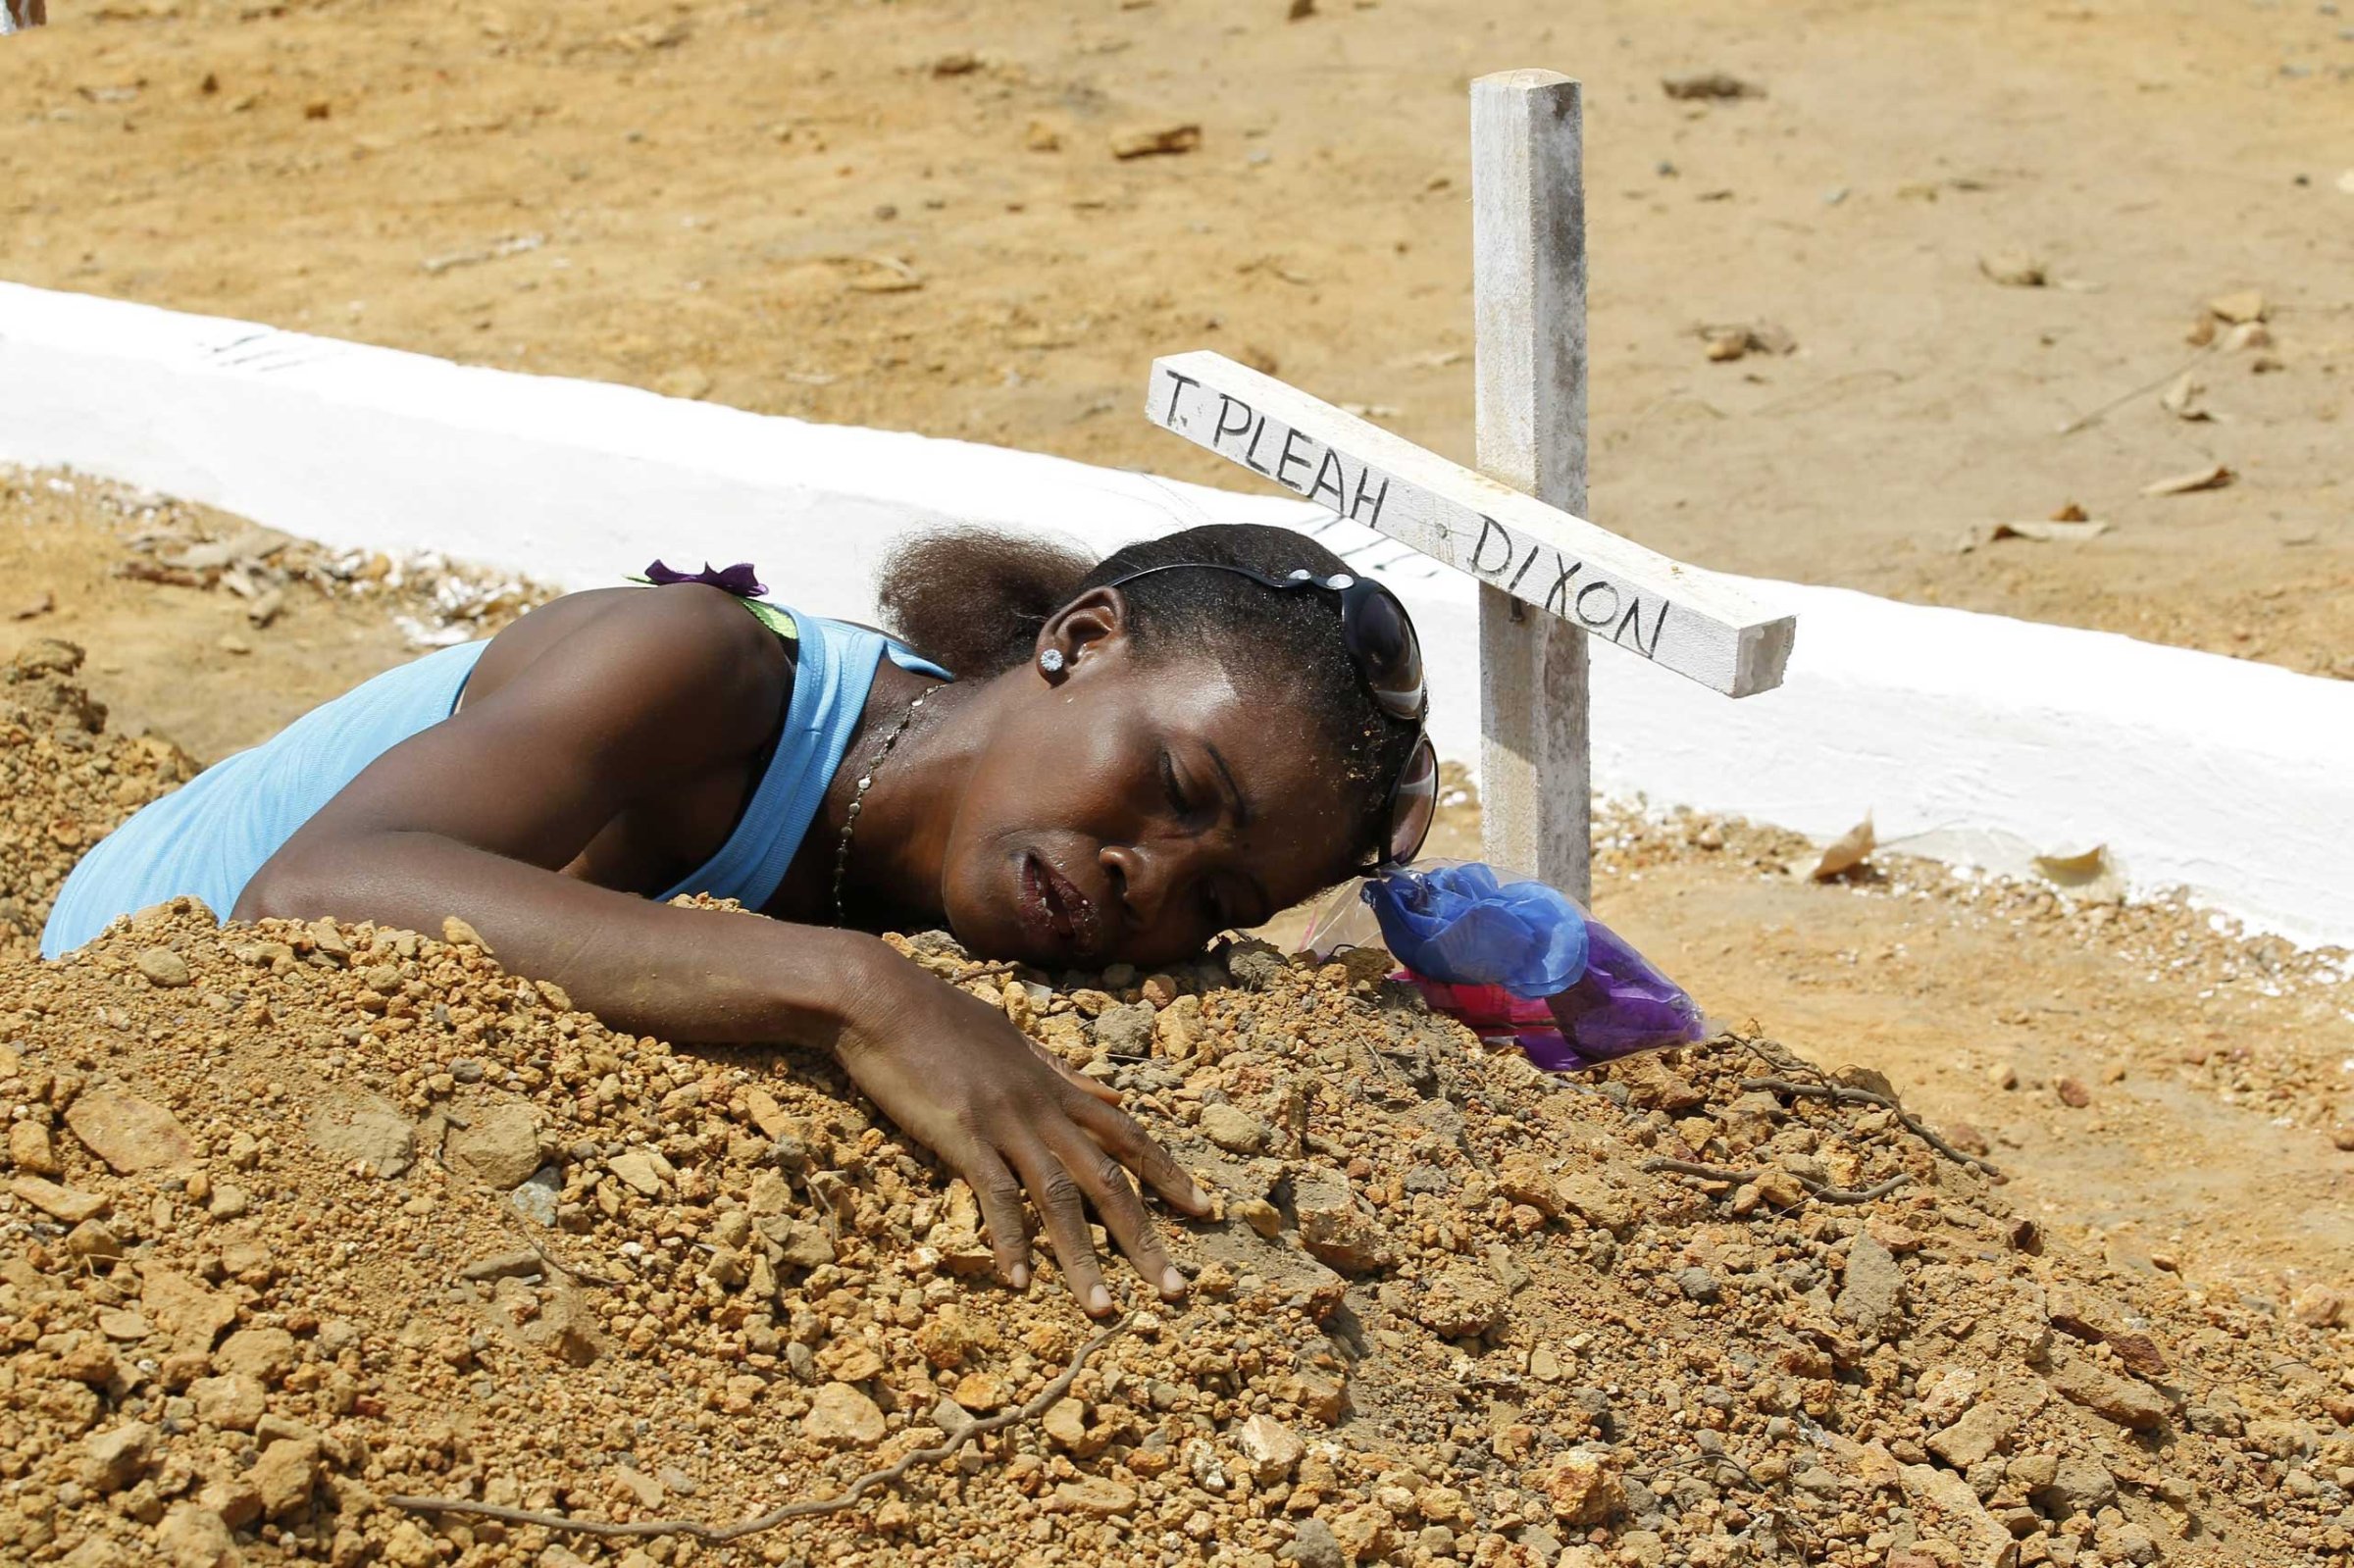 A woman mourns at the grave of her late brother at the National Cemetry on Disco Hill, Margibi County, Liberia, March 11, 2015.